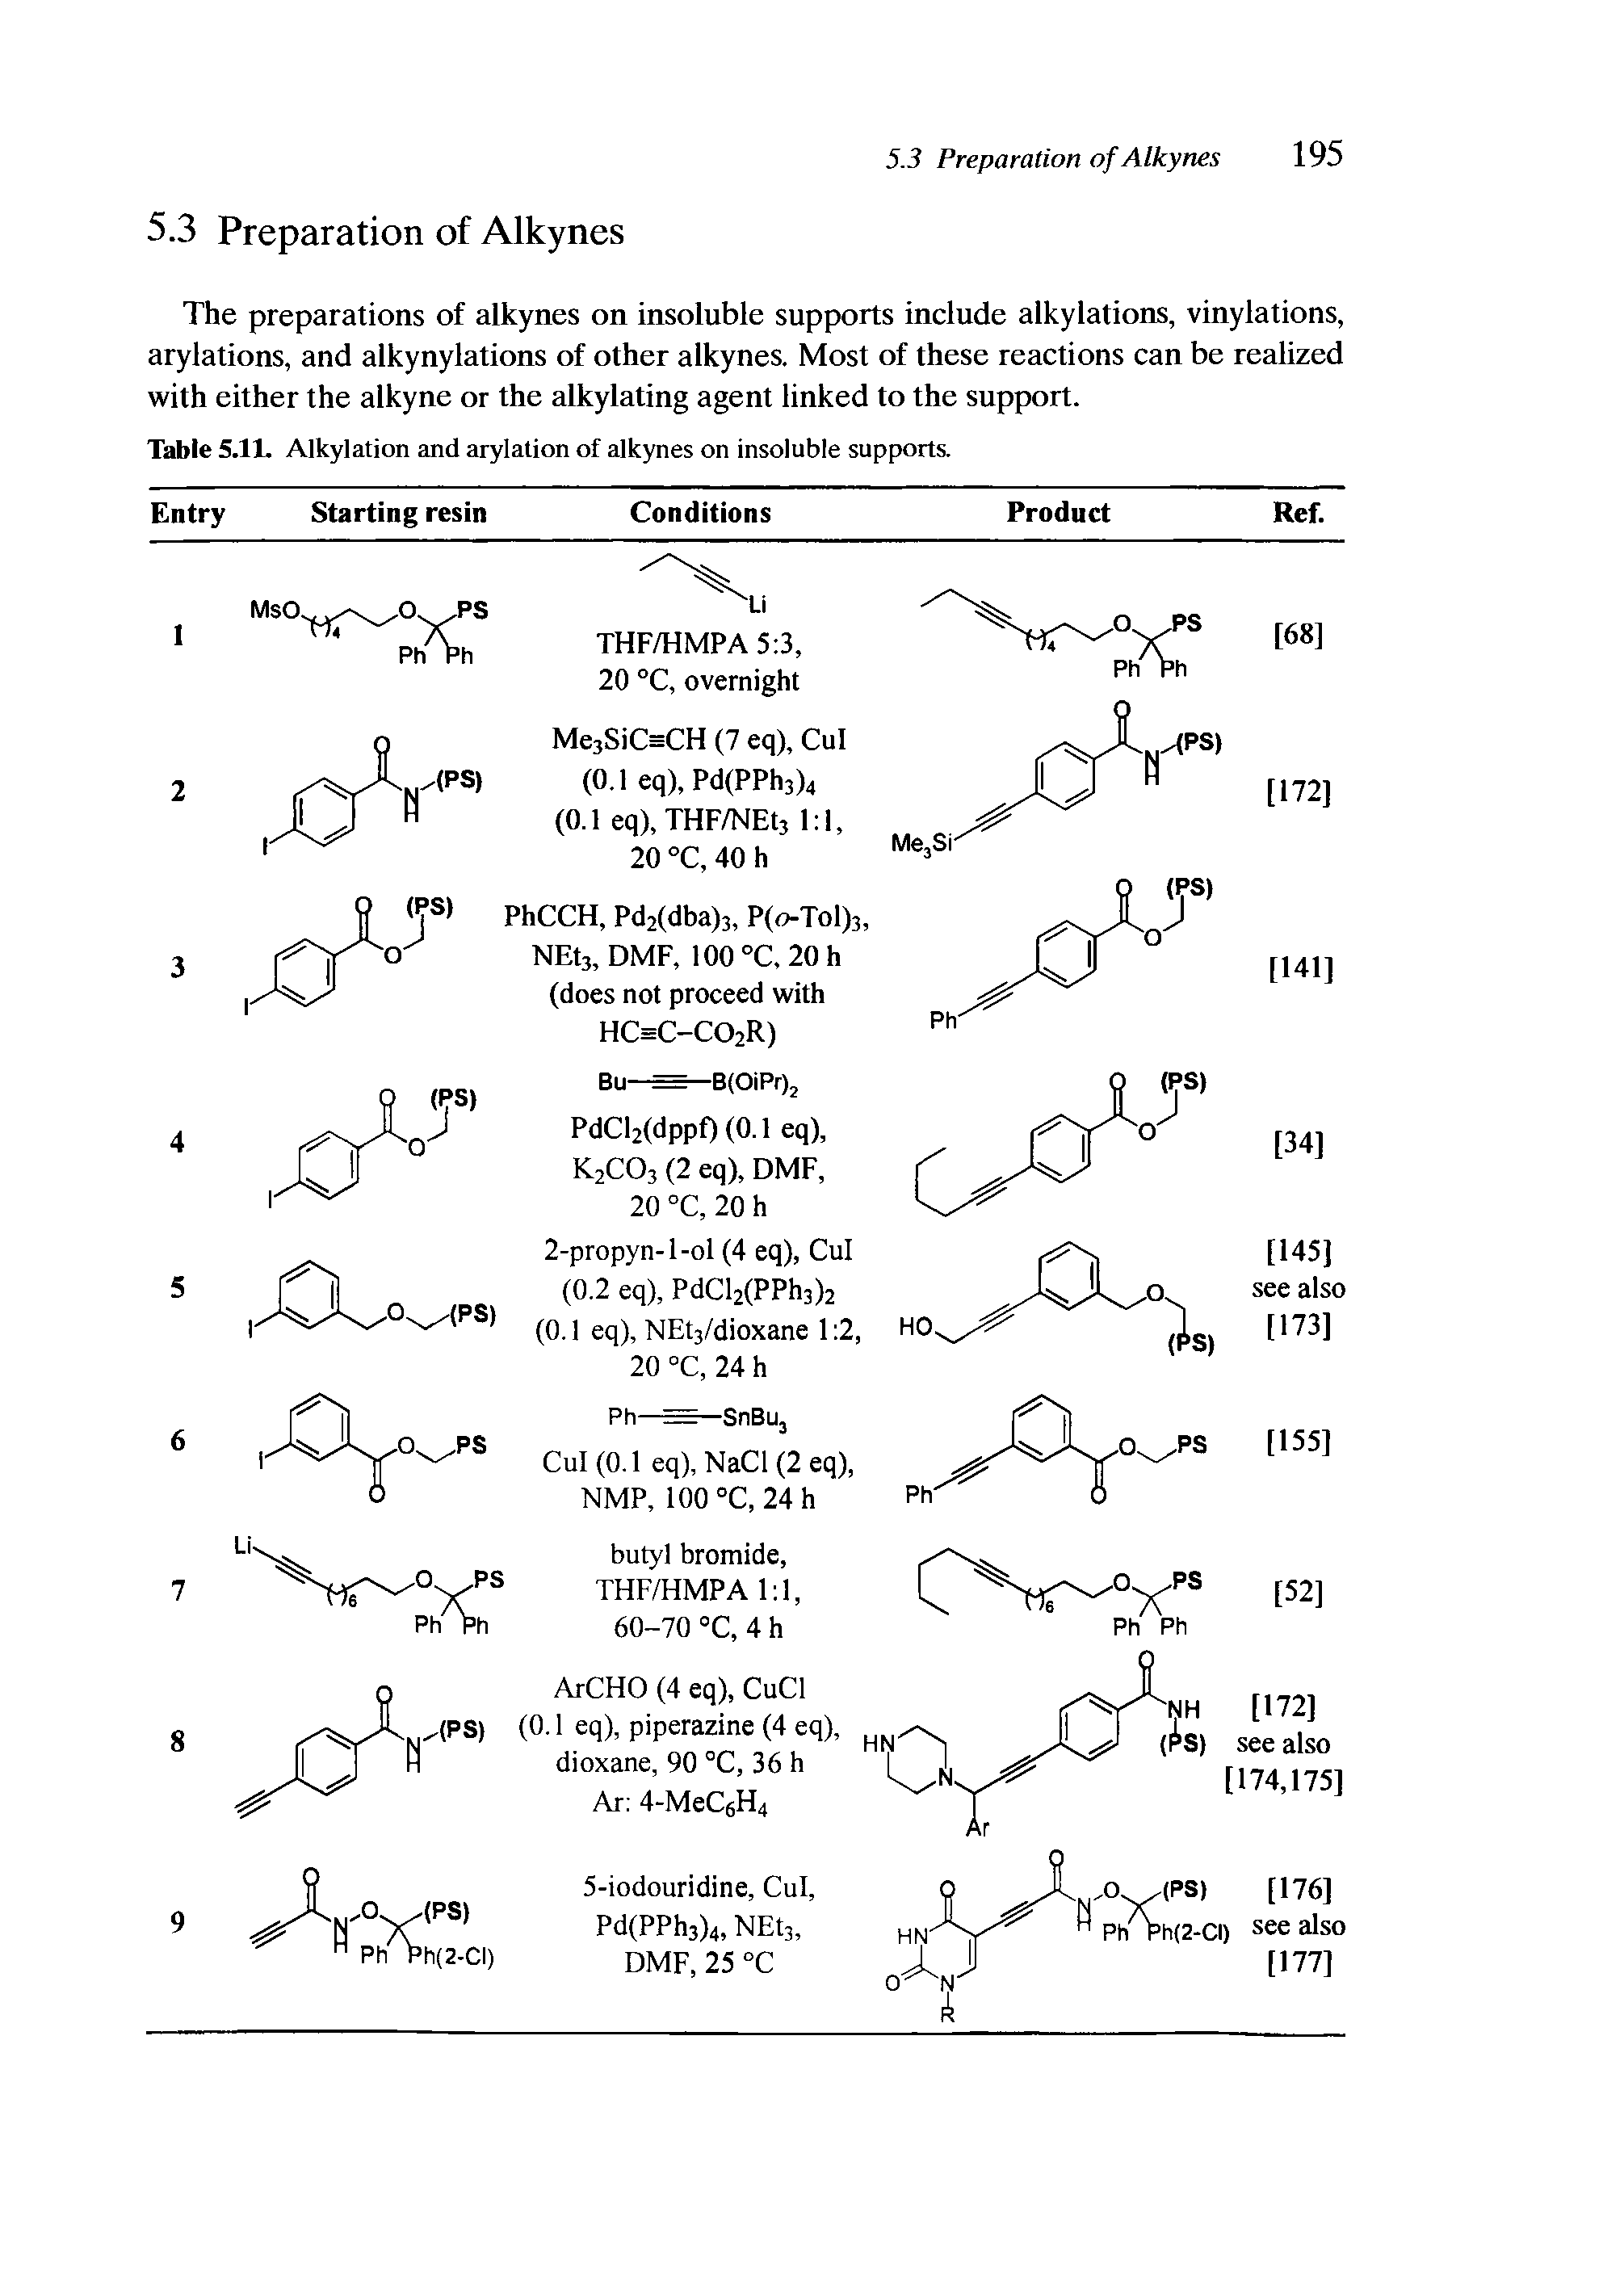 Table 5.11. Alkylation and arylation of alkynes on insoluble supports.